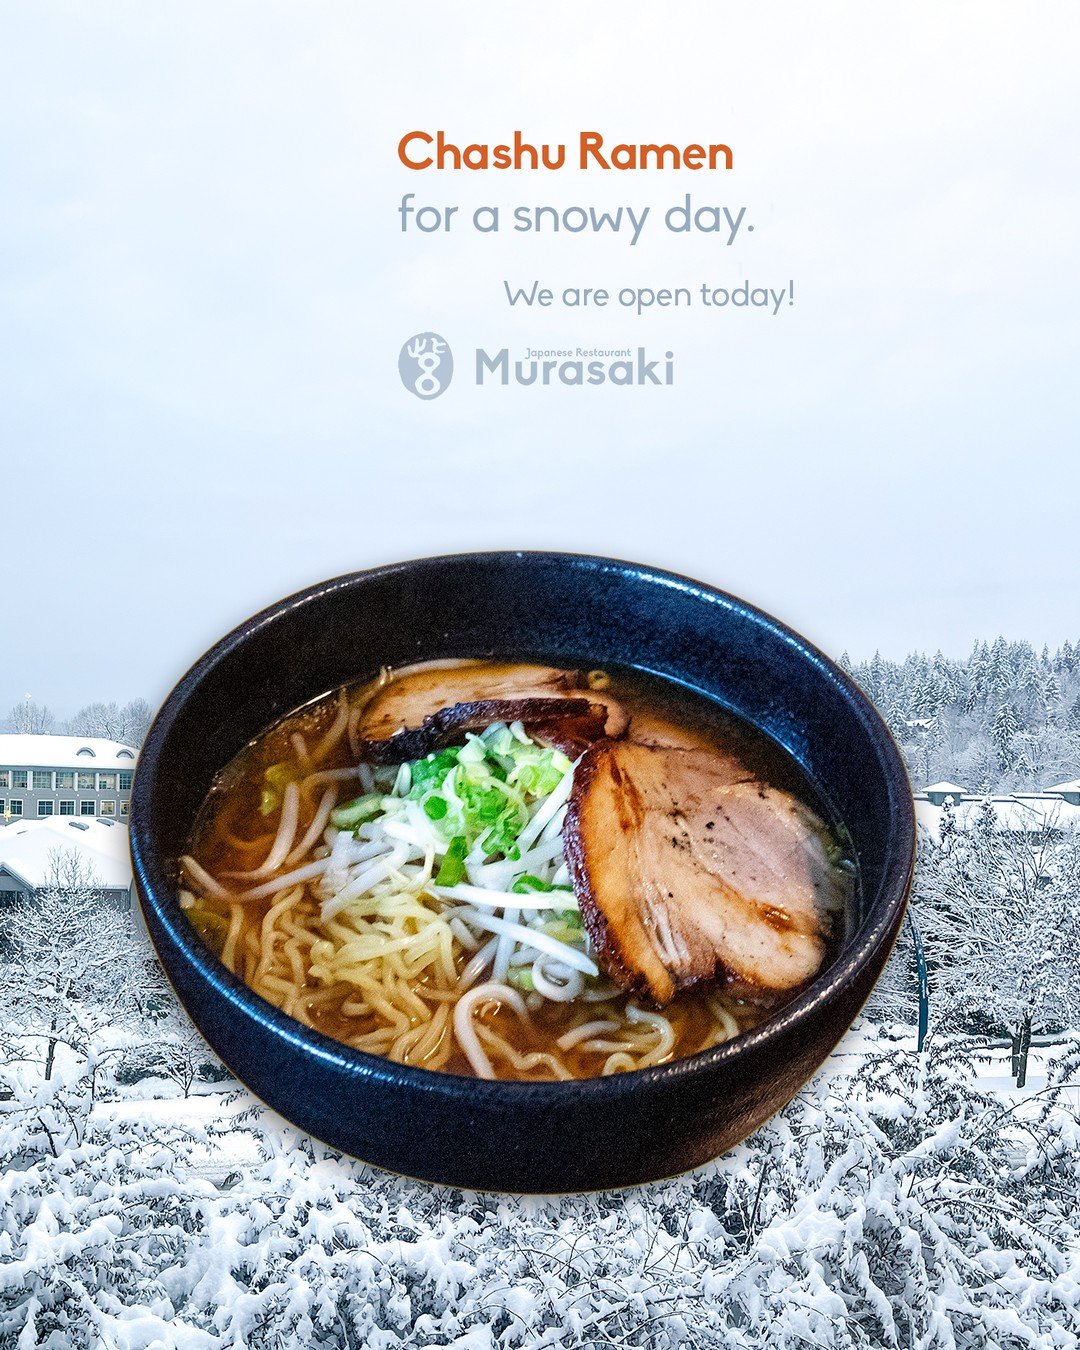 Cozy up with a bowl of our hot, rich, and delicious Chashu Ramen! ❄️🍜 Perfect for snowy days. Let the warmth of Japanese ramen melt away the chill. Come join us and savor the season! ☃️ 

#PortMoodyEats #ChashuRamen #WinterWarmth #ramen #murasaki #j